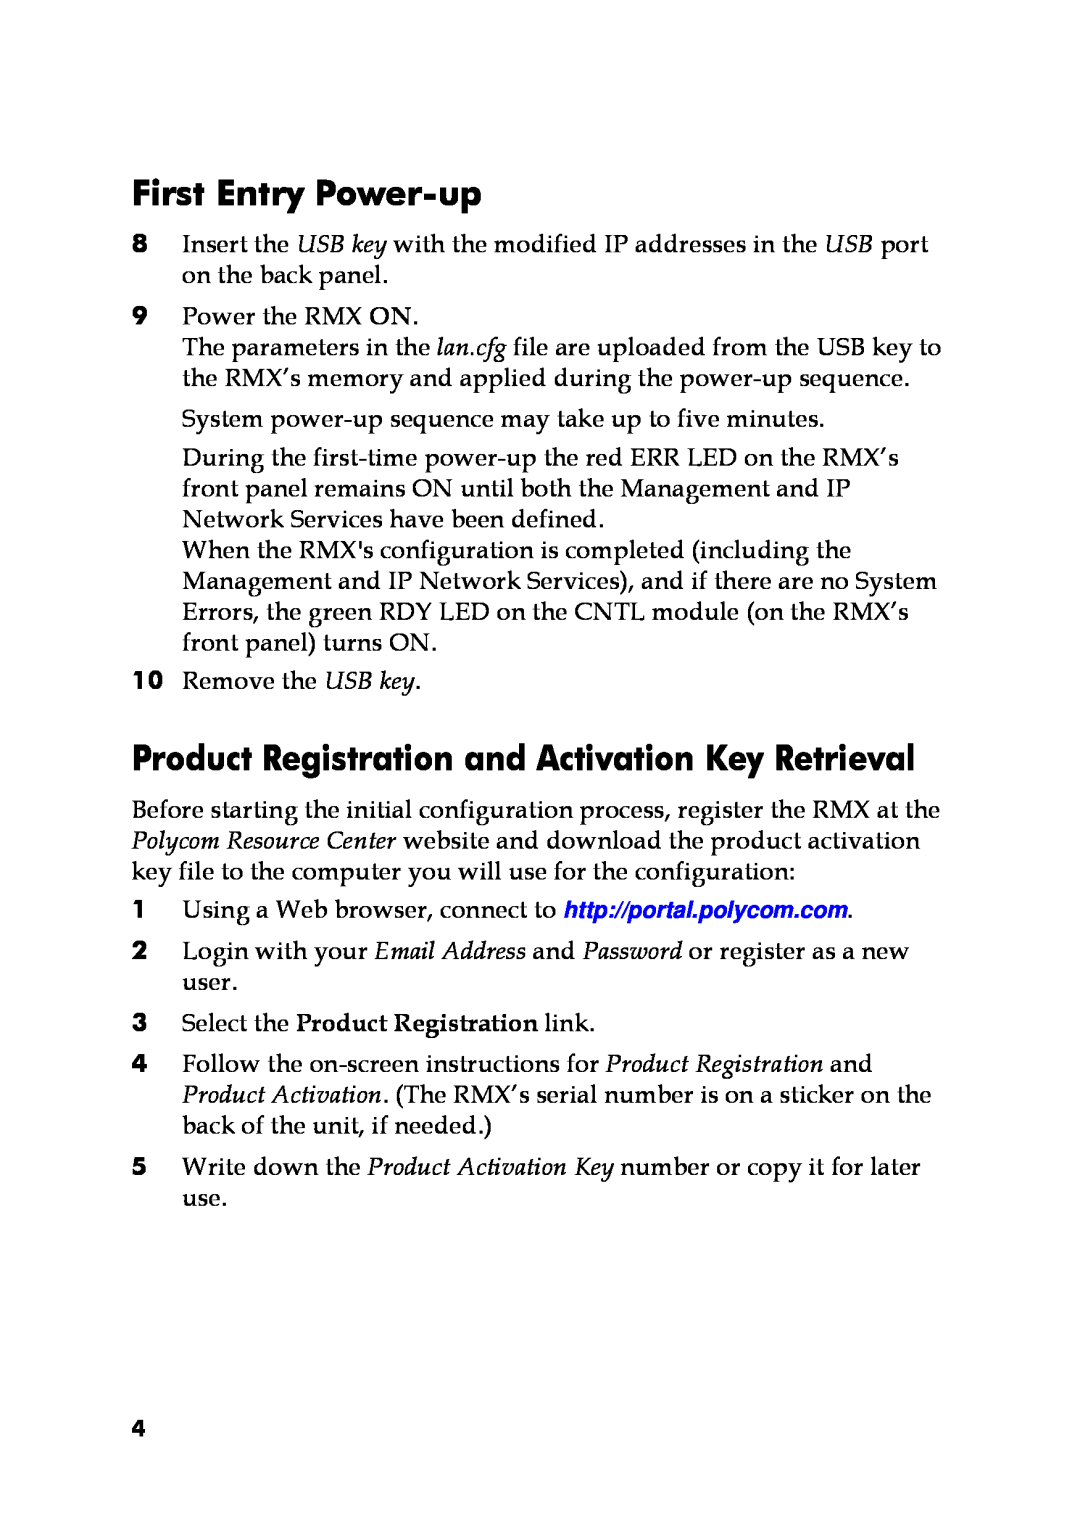 Polycom DOC2563A manual First Entry Power-up, Product Registration and Activation Key Retrieval 